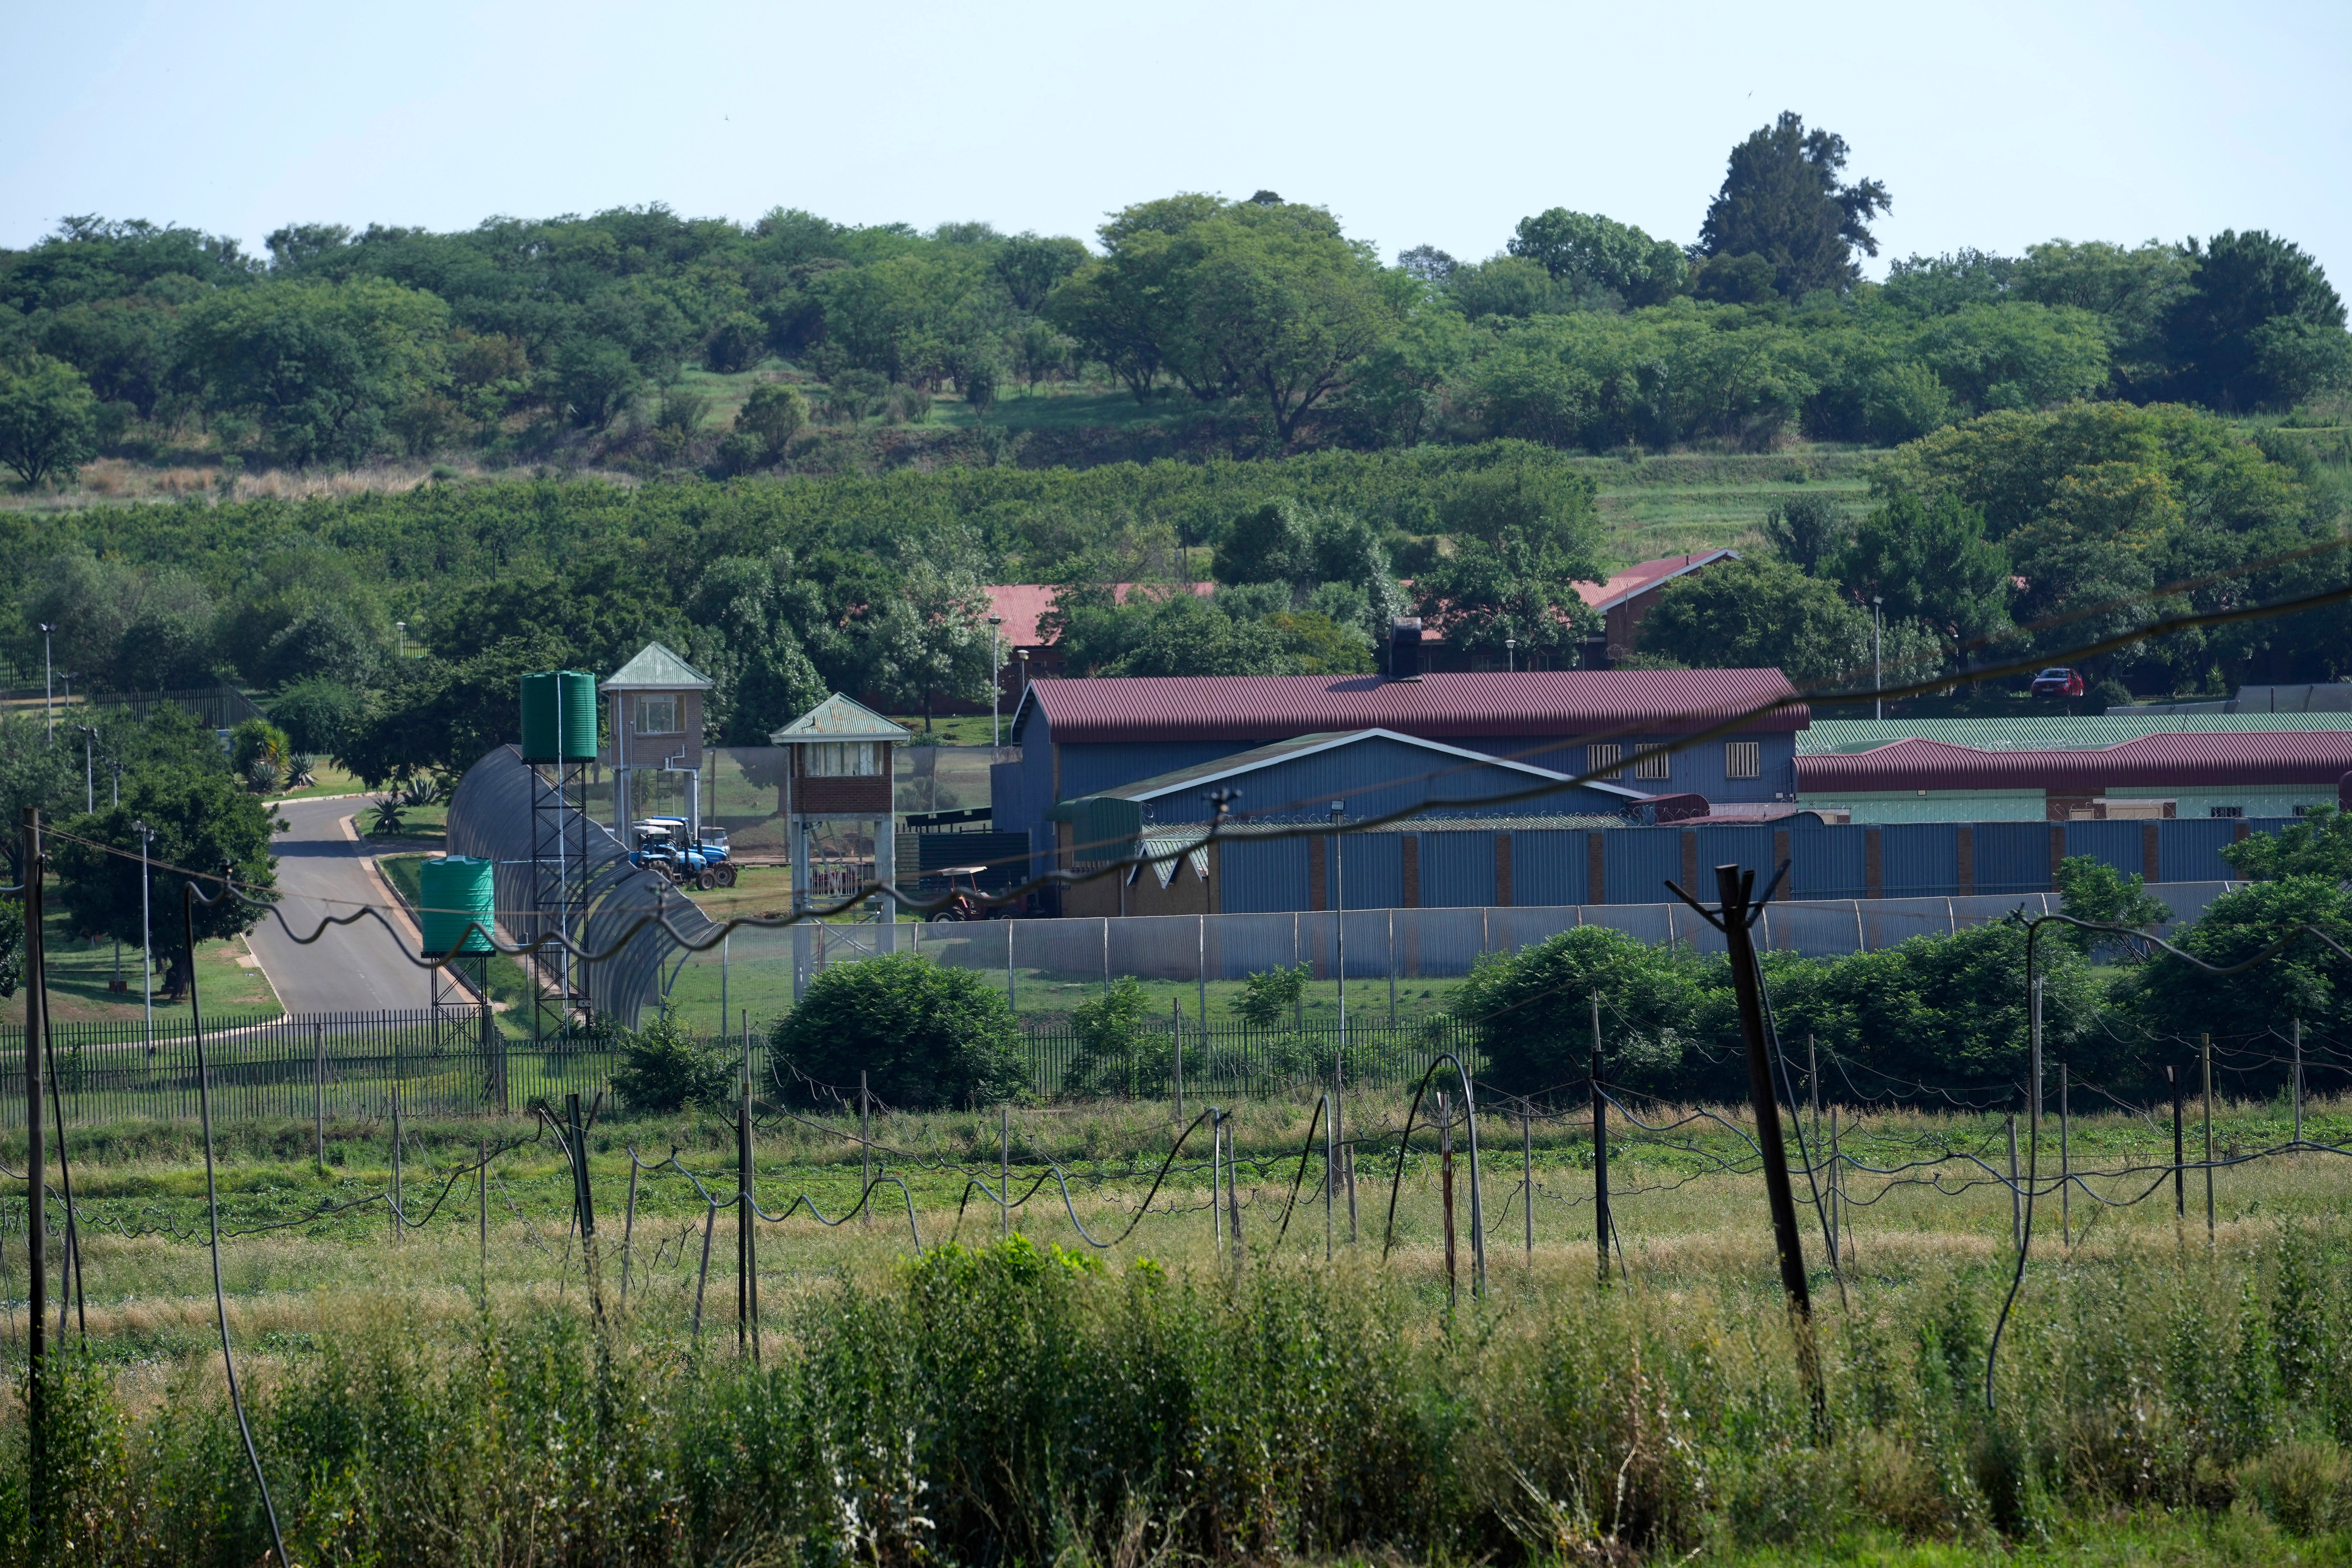 A general view of Atteridgeville prison where Pistorius has served part of his sentence for murdering his girlfriend in 2013